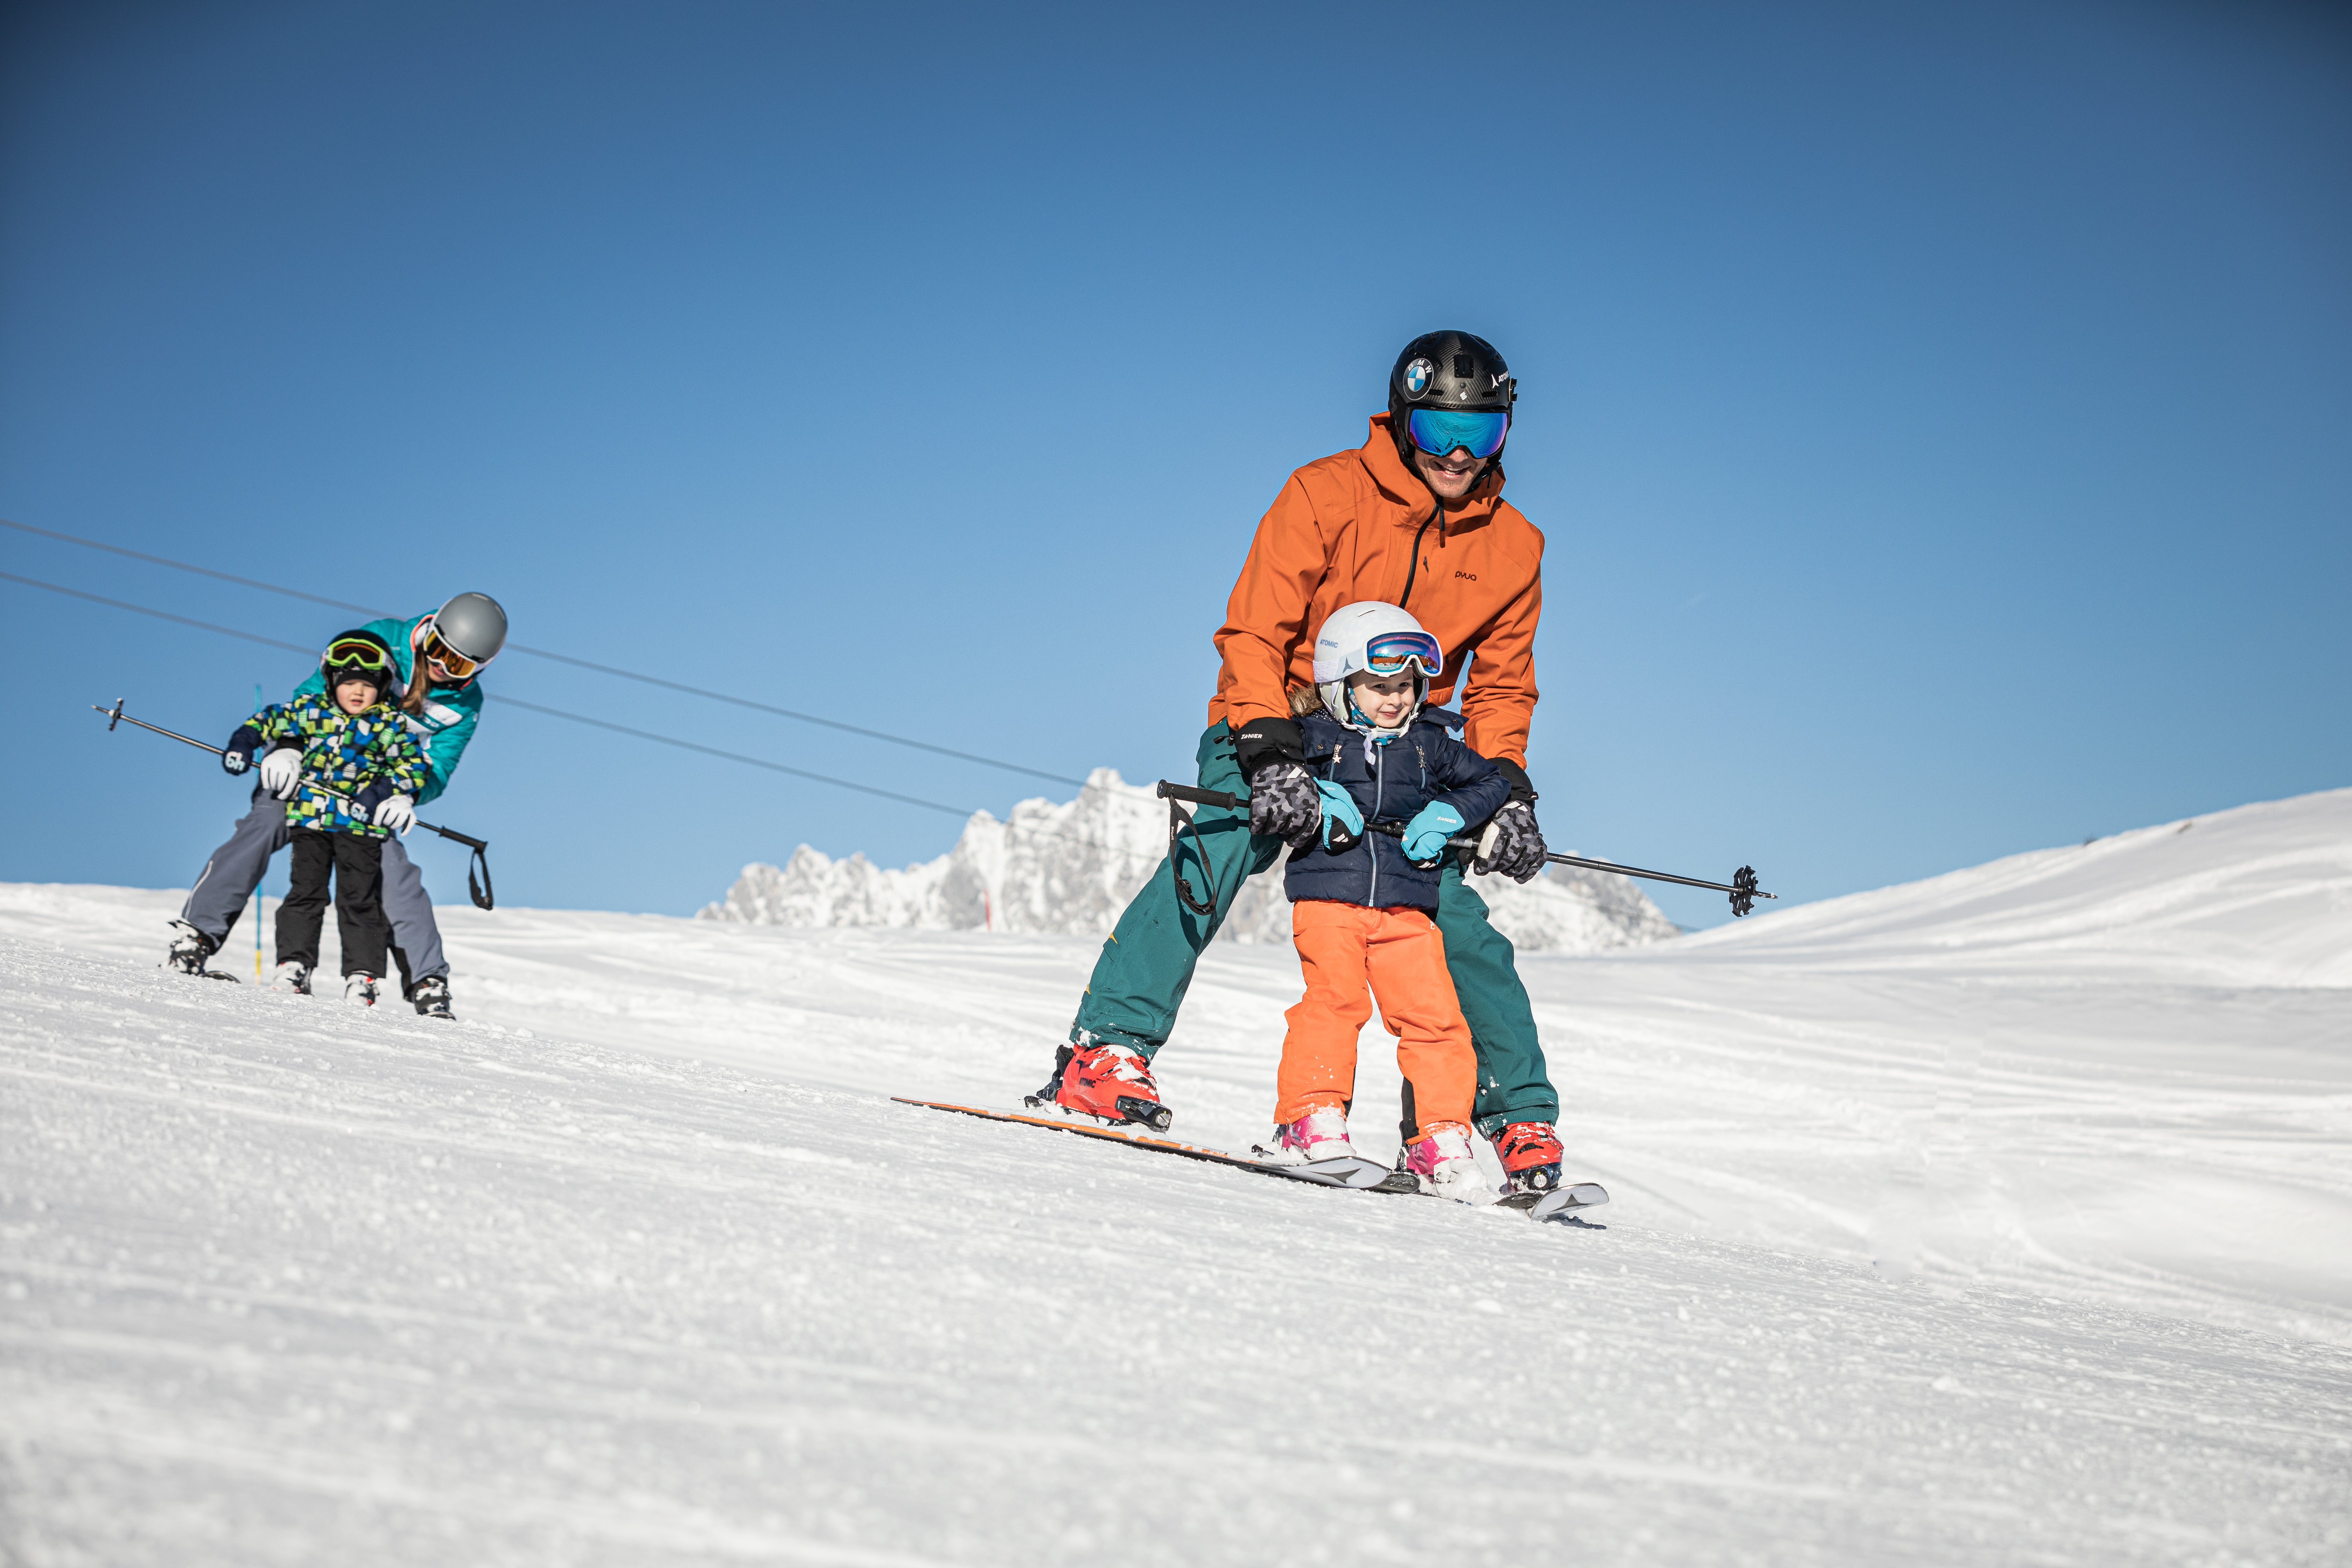 With slopes for all ages and abilities, St Johann in Tirol is perfect for a family ski trip